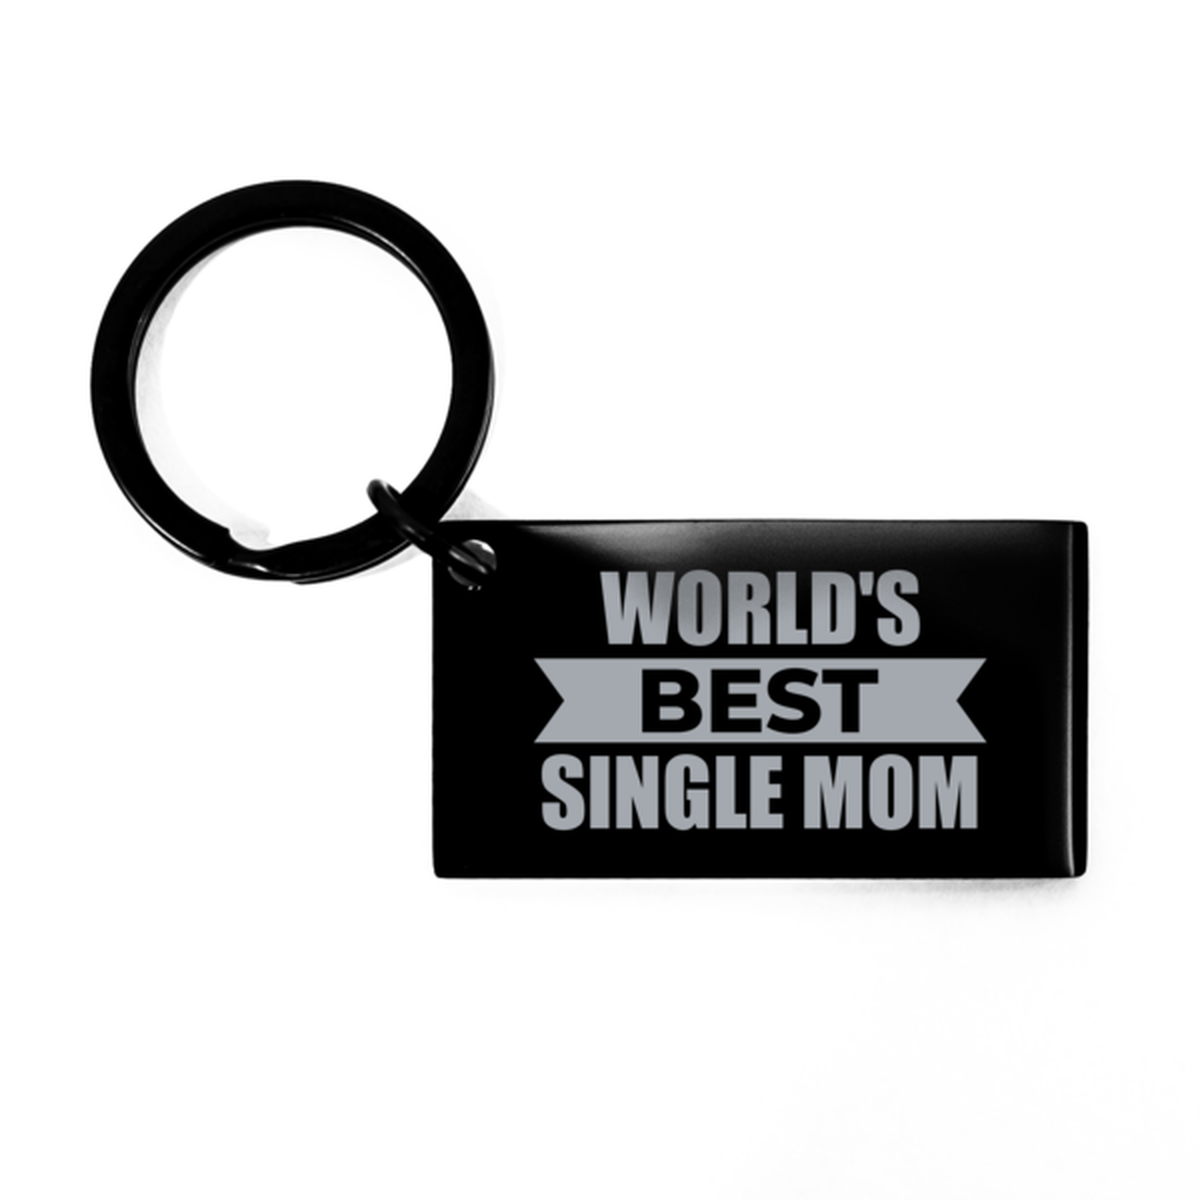 Worlds Best Single mom Gifts, Funny Black Engraved Keychain For Single mom, Birthday Presents For Women